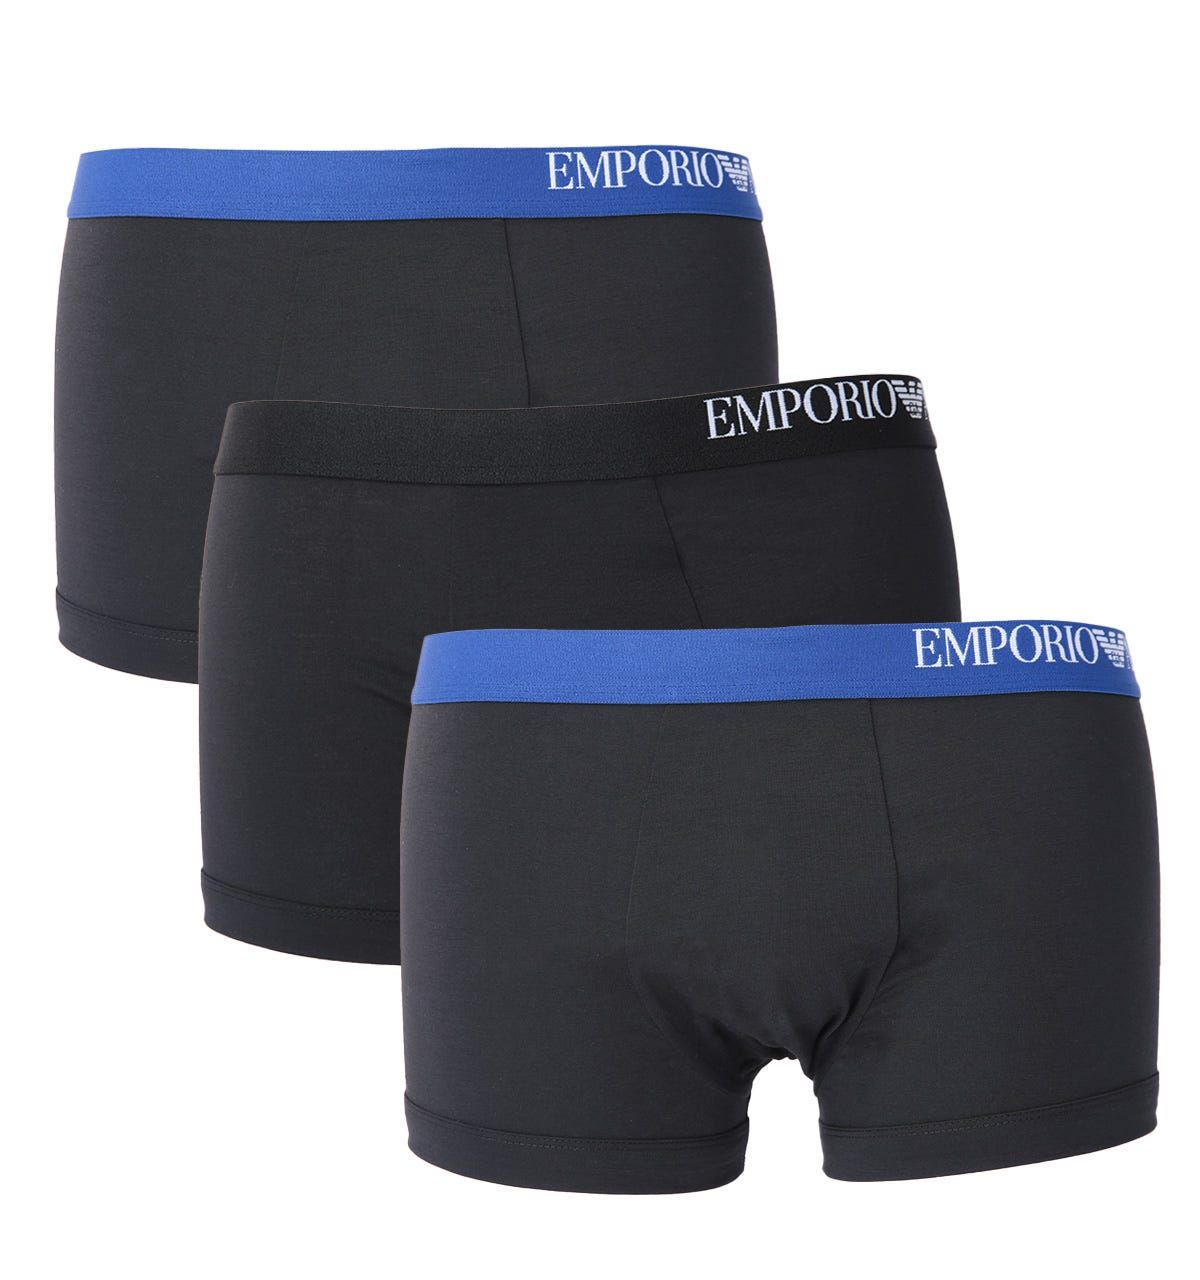 Elevate your everyday essentials this season with Emporio Armani Loungewear. This three-pack of boxer trunks is crafted from innovative soft touch eco fibre, ensuring day-long comfort with maximum ease of movement and breathability. Each pair is finished with Emporio Armani branding at the elasticated waistband.Three Pack, Soft Touch Eco Fibre, Box Packaging, 95% Recycled Polyester & 5% Elastane, Emporio Armani Branding.